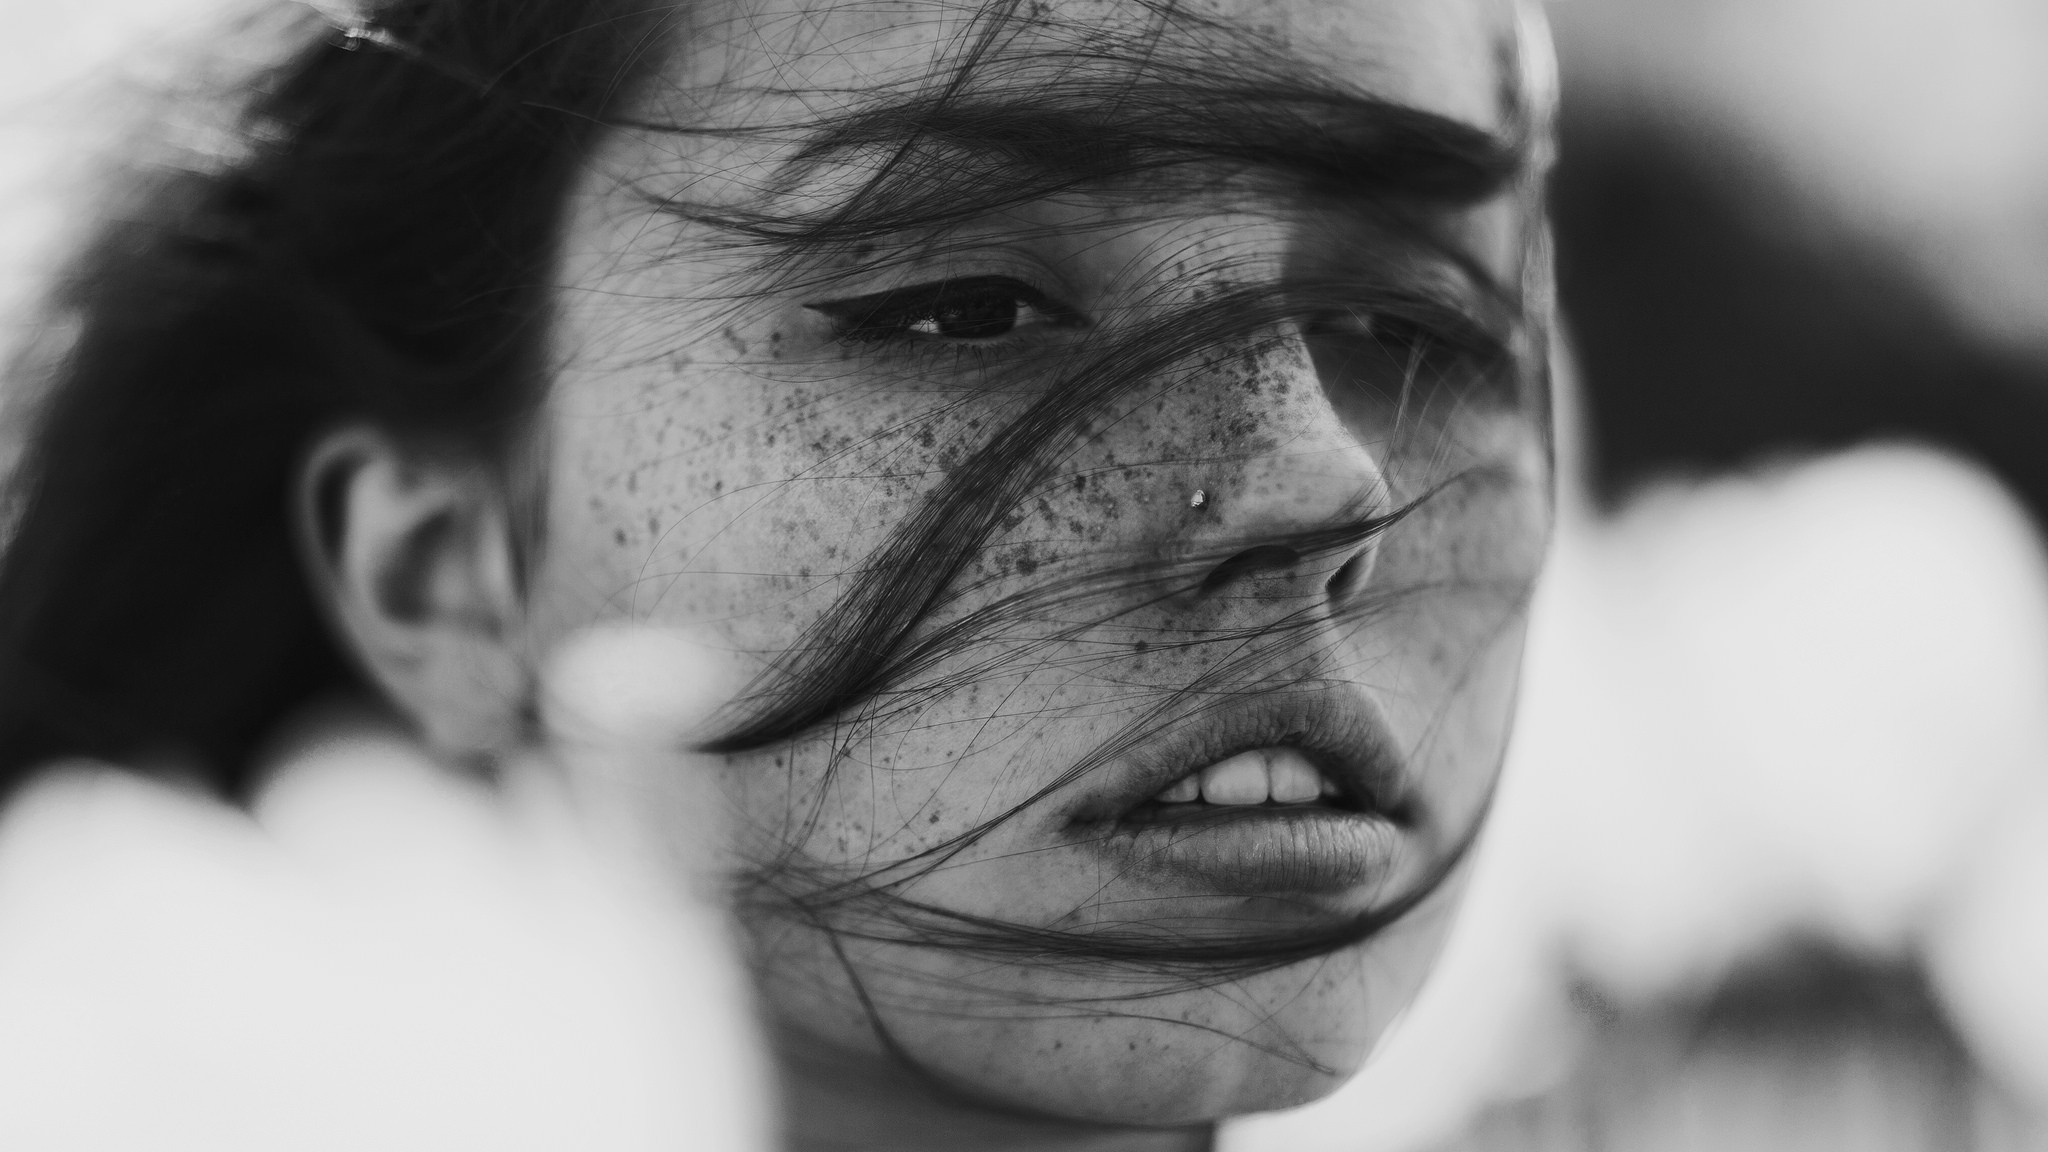 Women Ruby James Skye Thompson Monochrome Freckles Pierced Nose Looking Away Hair In Face Open Mouth 2048x1152